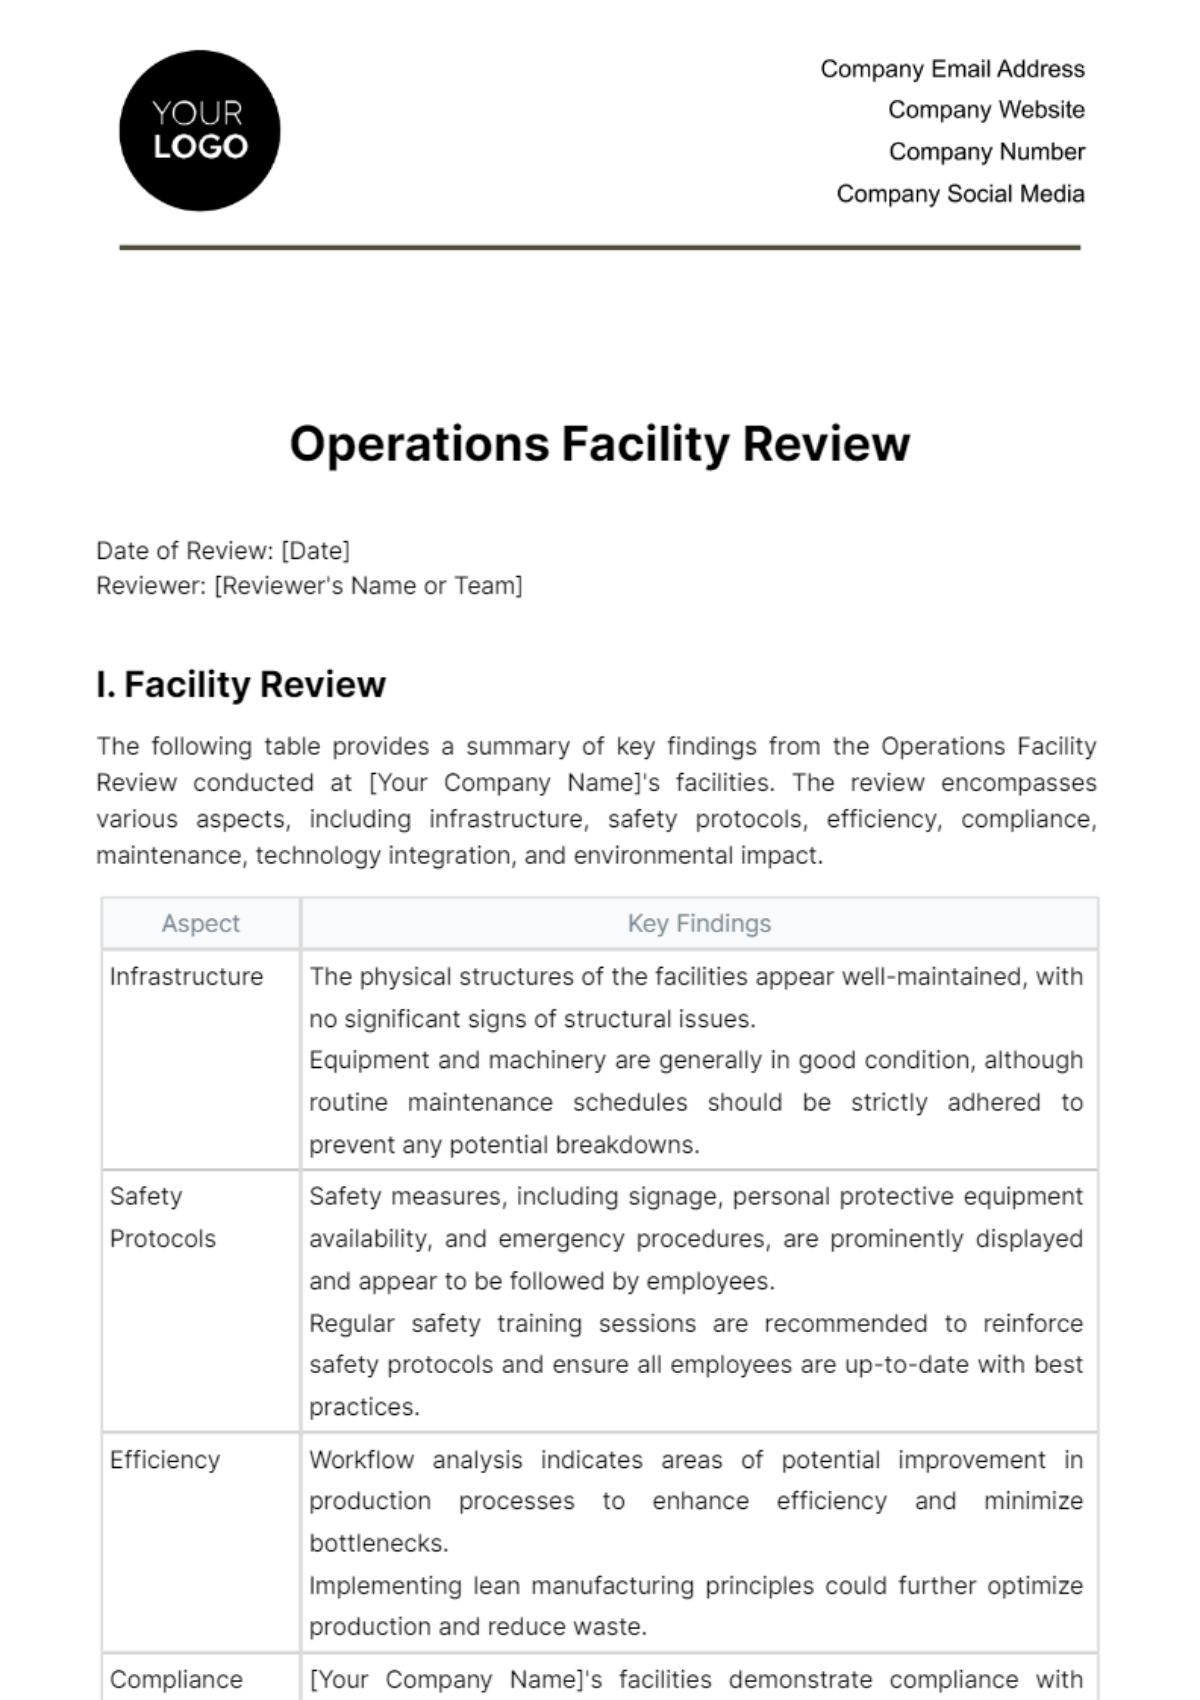 Operations Facility Review Template